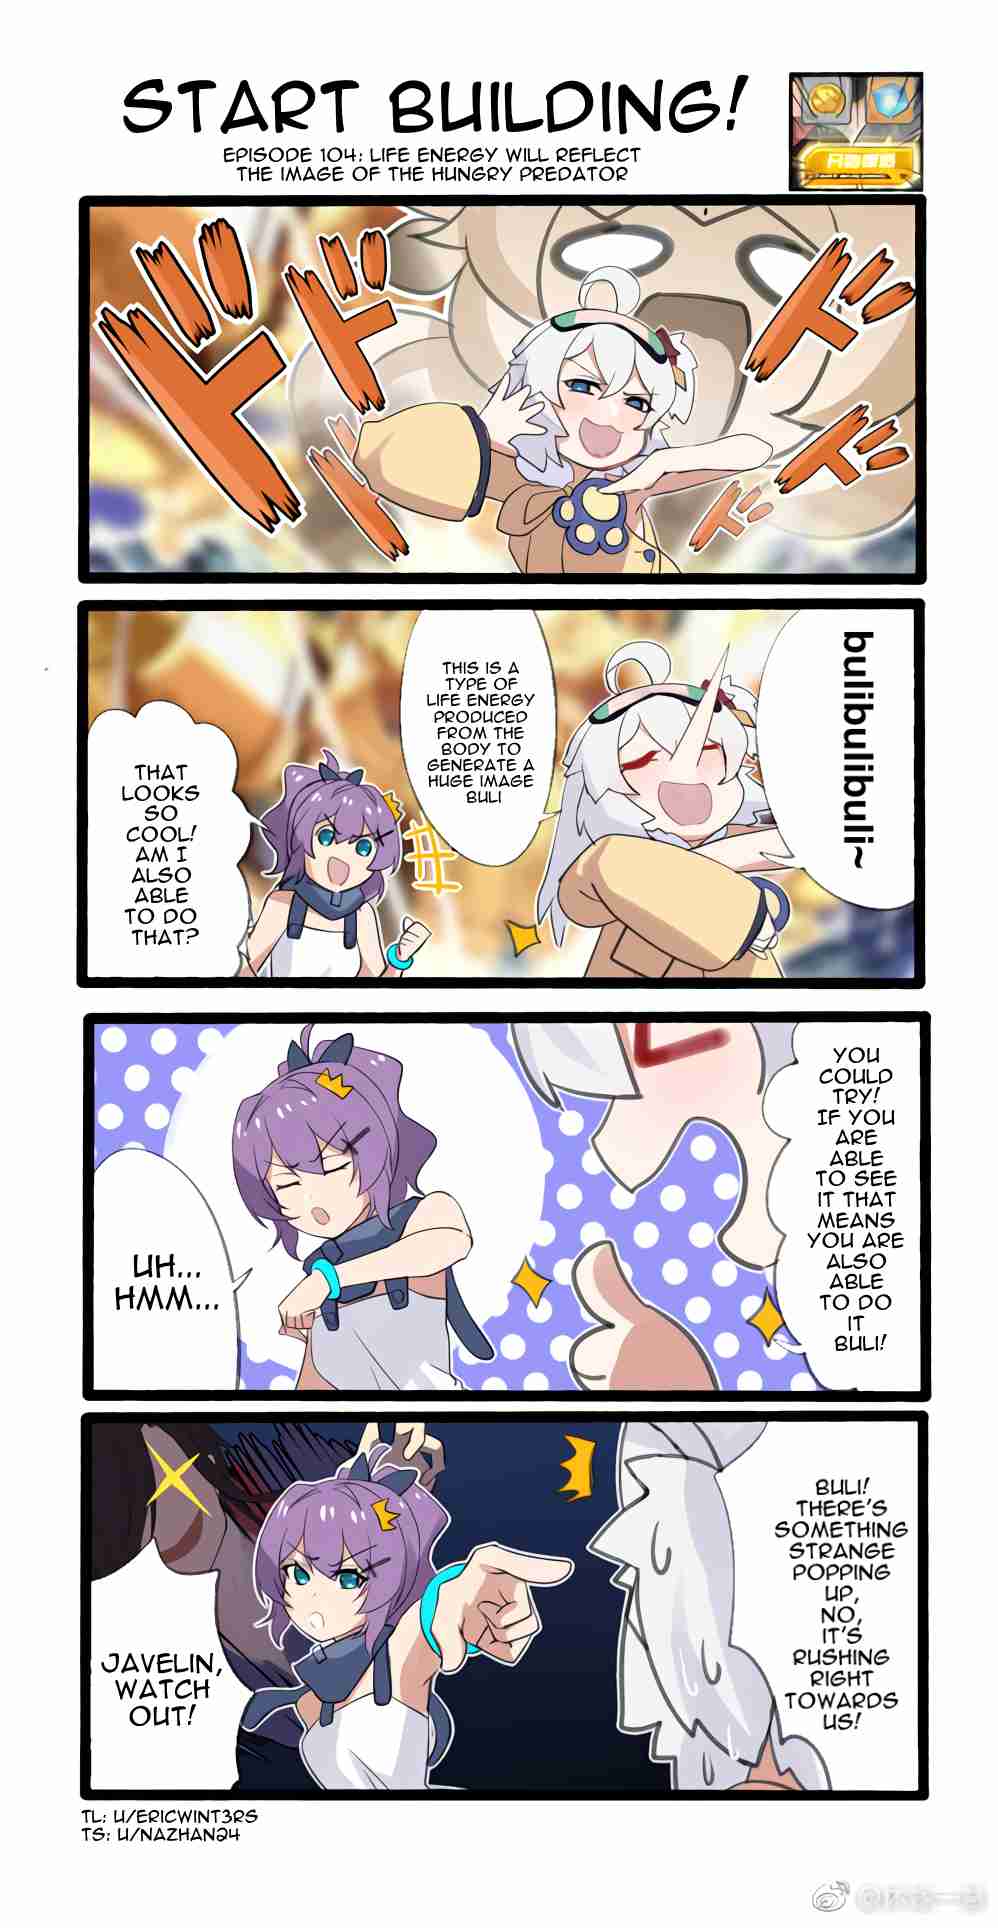 Azur Lane Start Building! (Doujinshi) Ch. 104 Life energy will reflect the image of the hungry predator